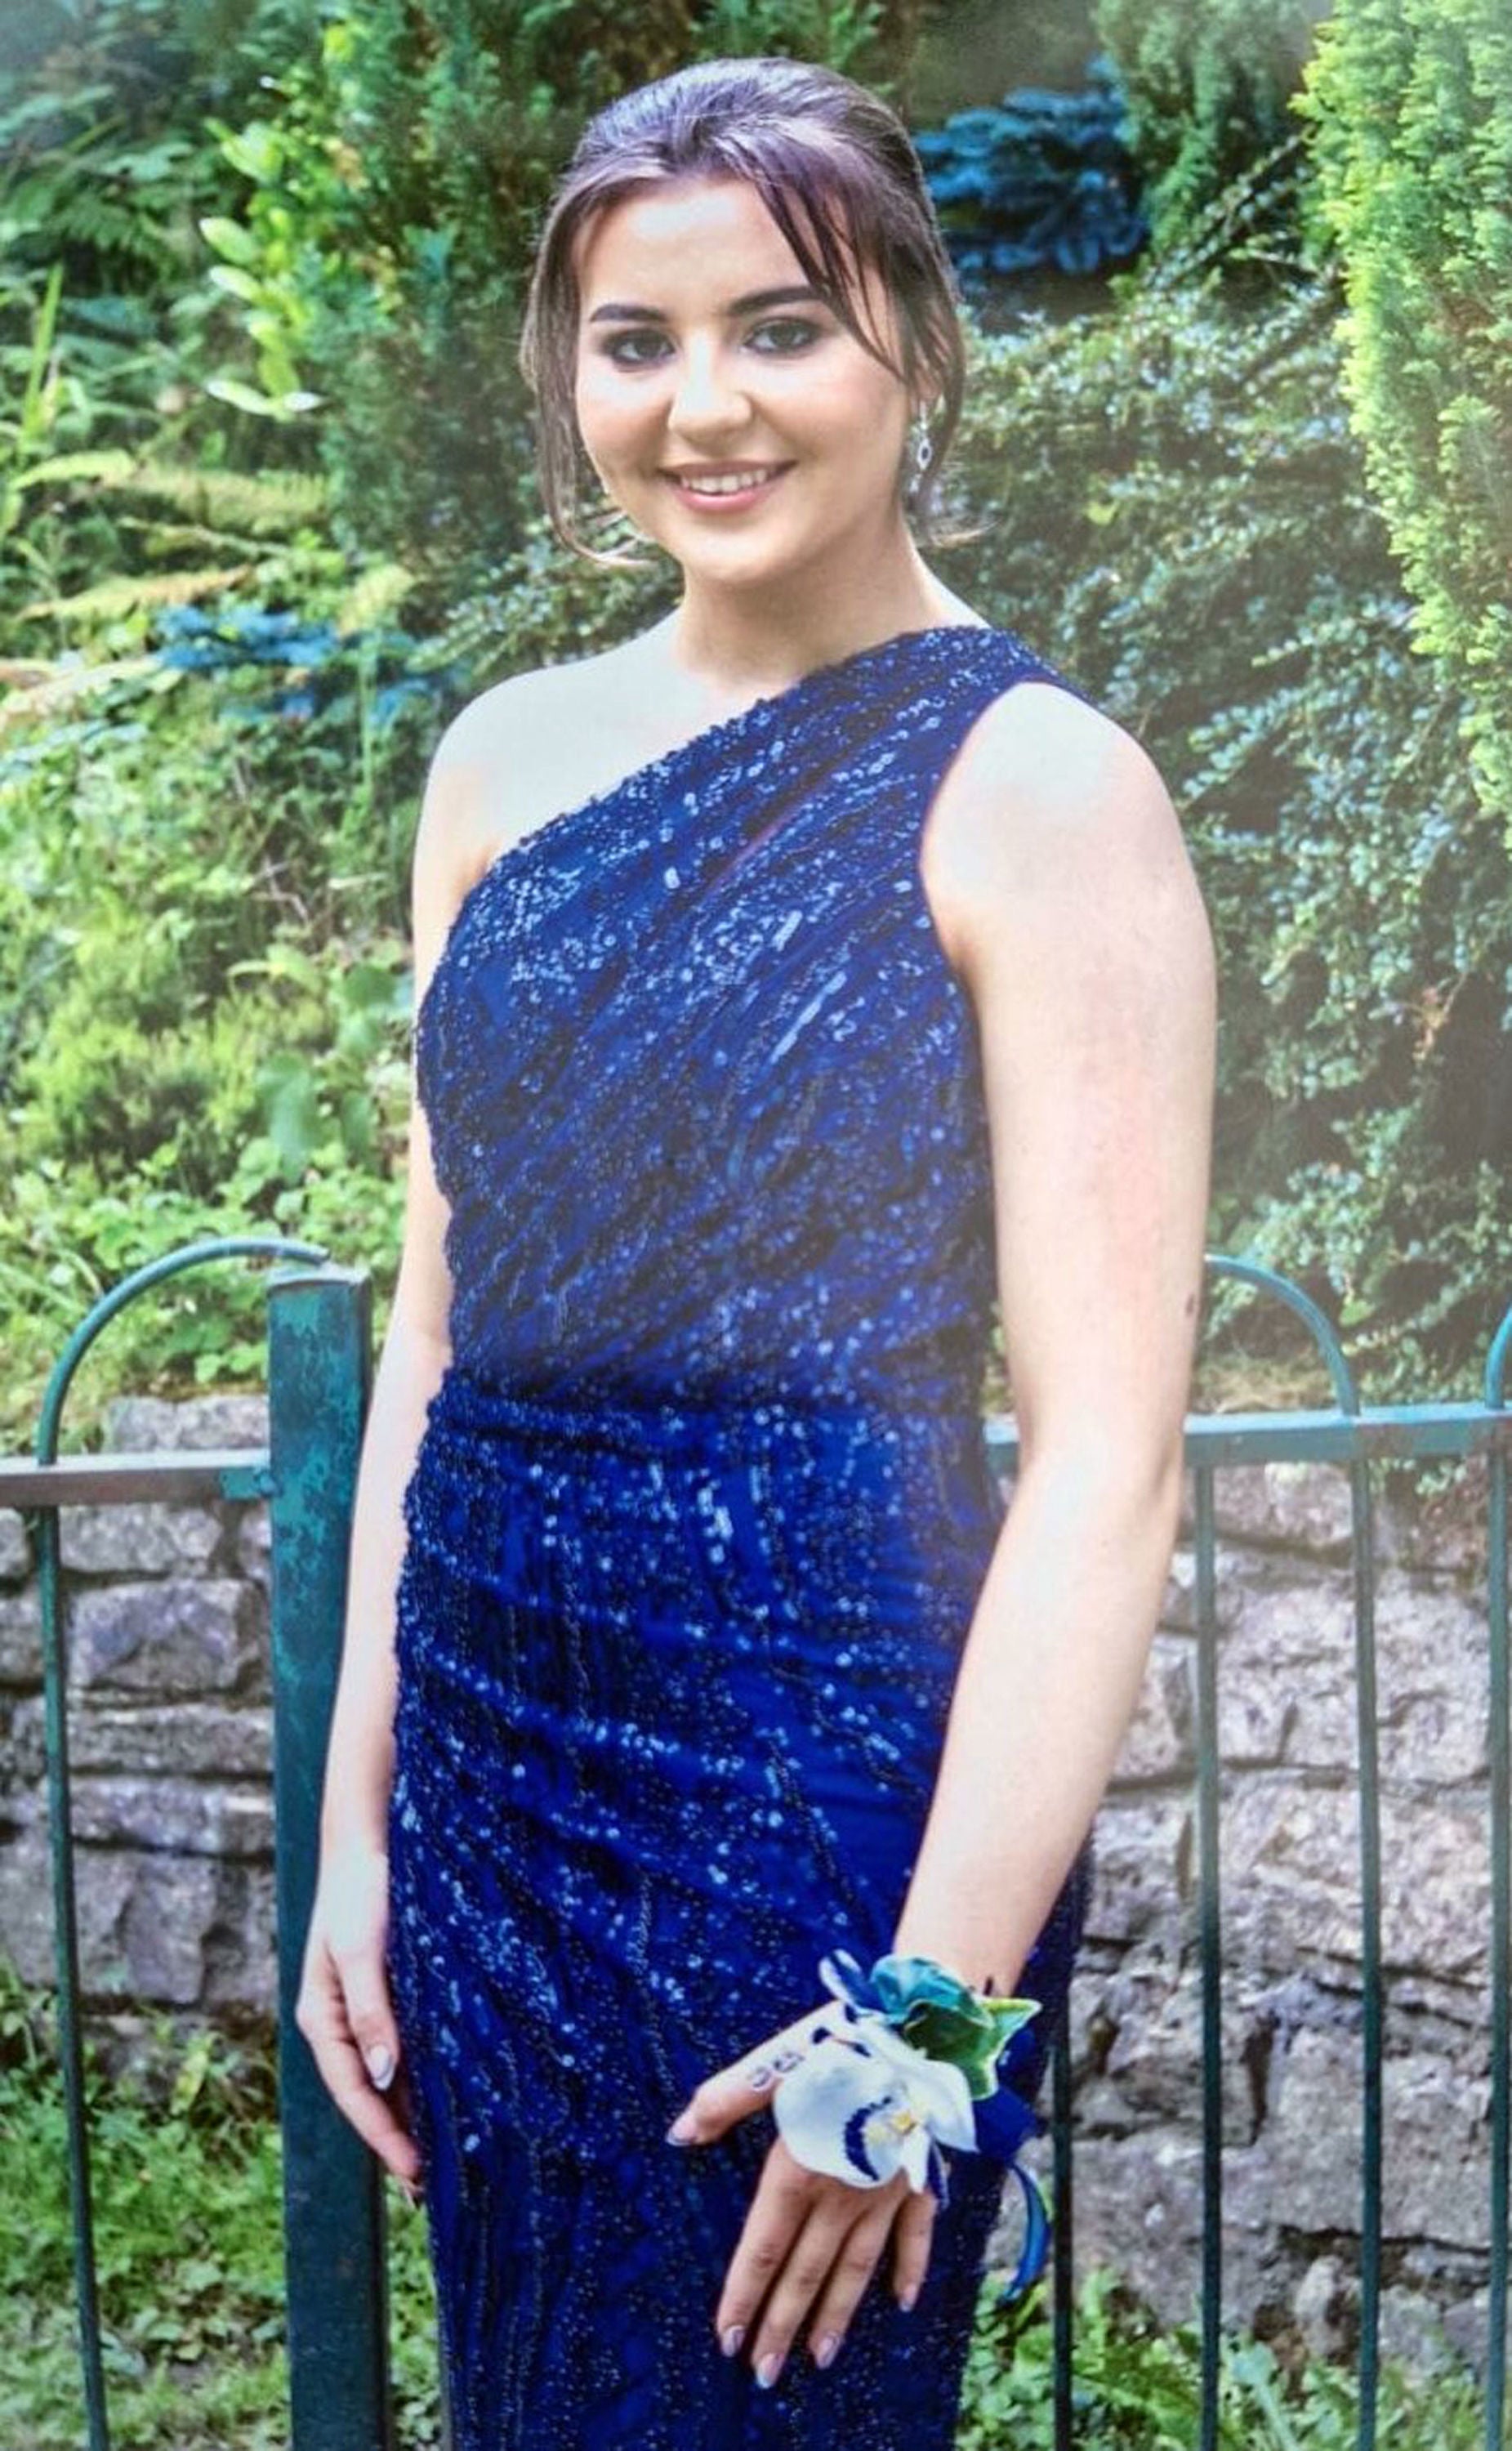 Grace McSweeney was one of three 18 year-old girls who died in the incident